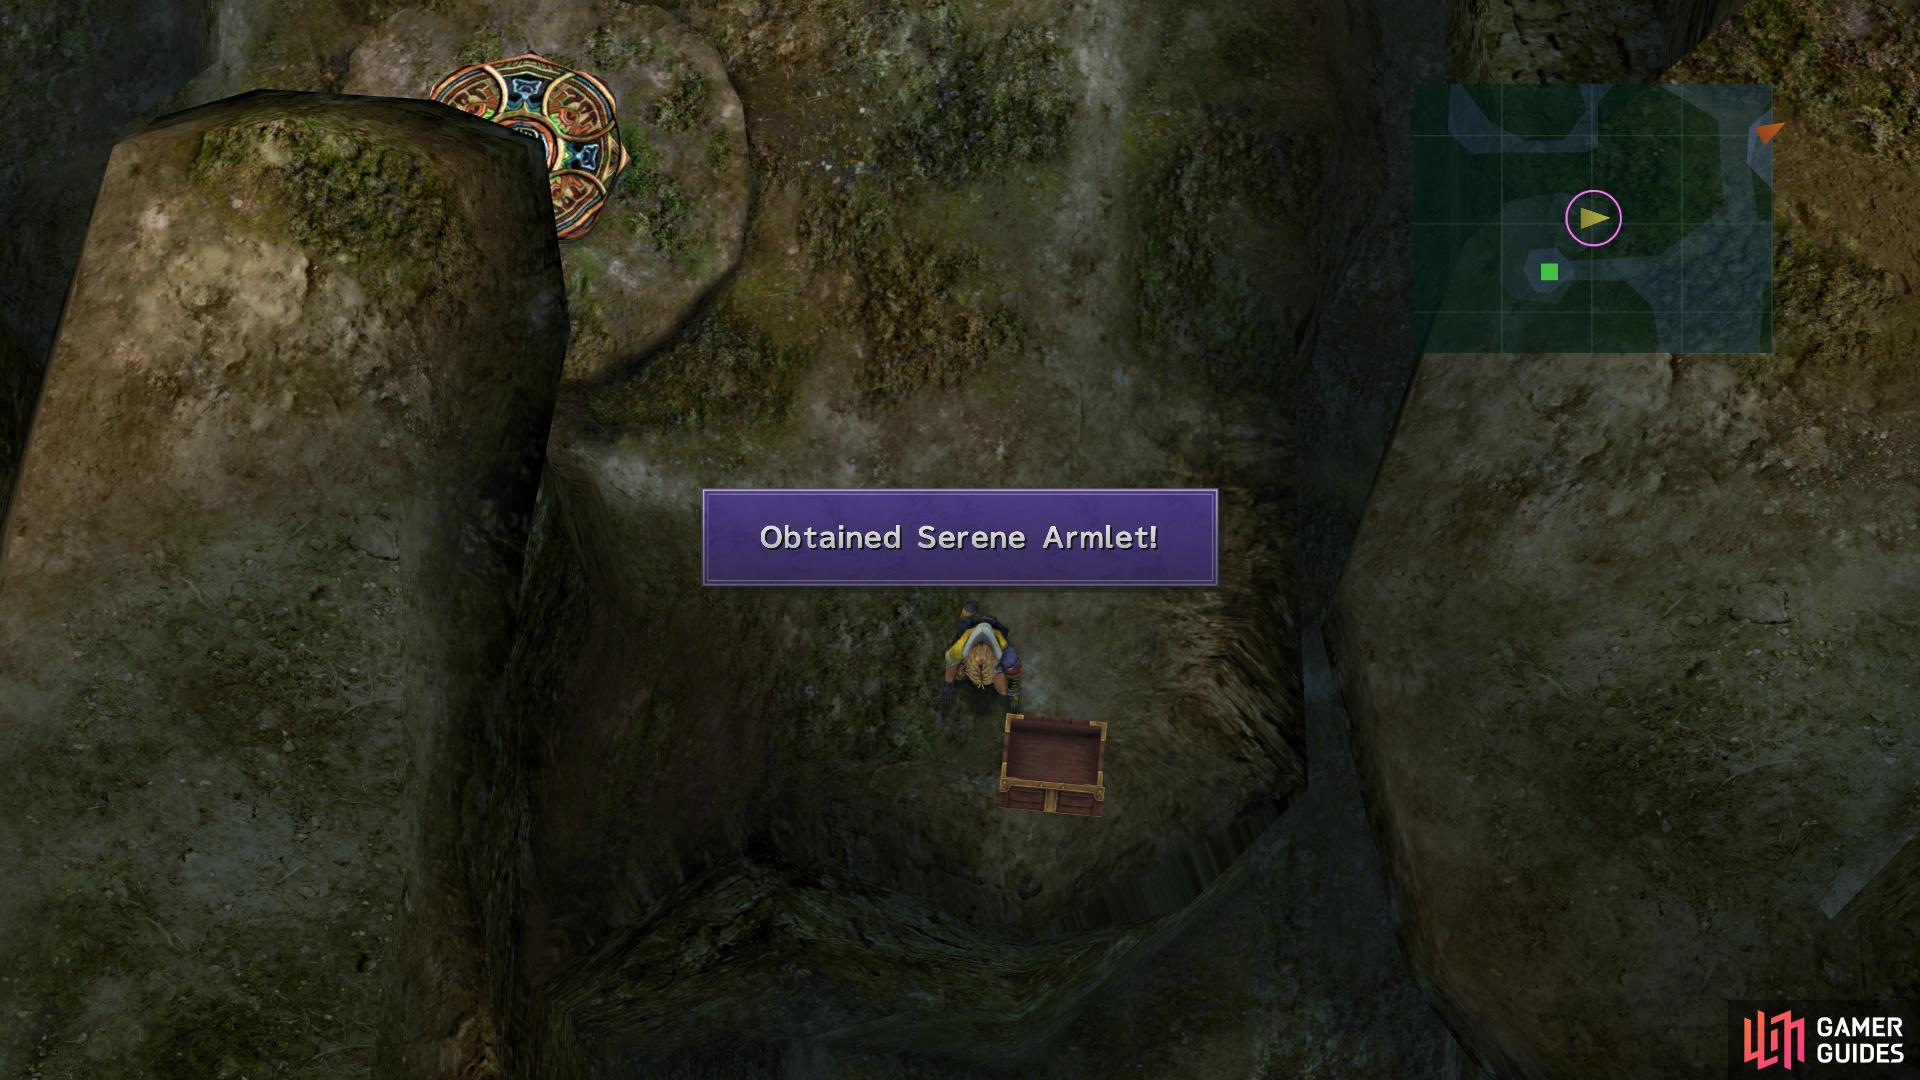 Take the one elevator to reach this chest with a Serene Armlet